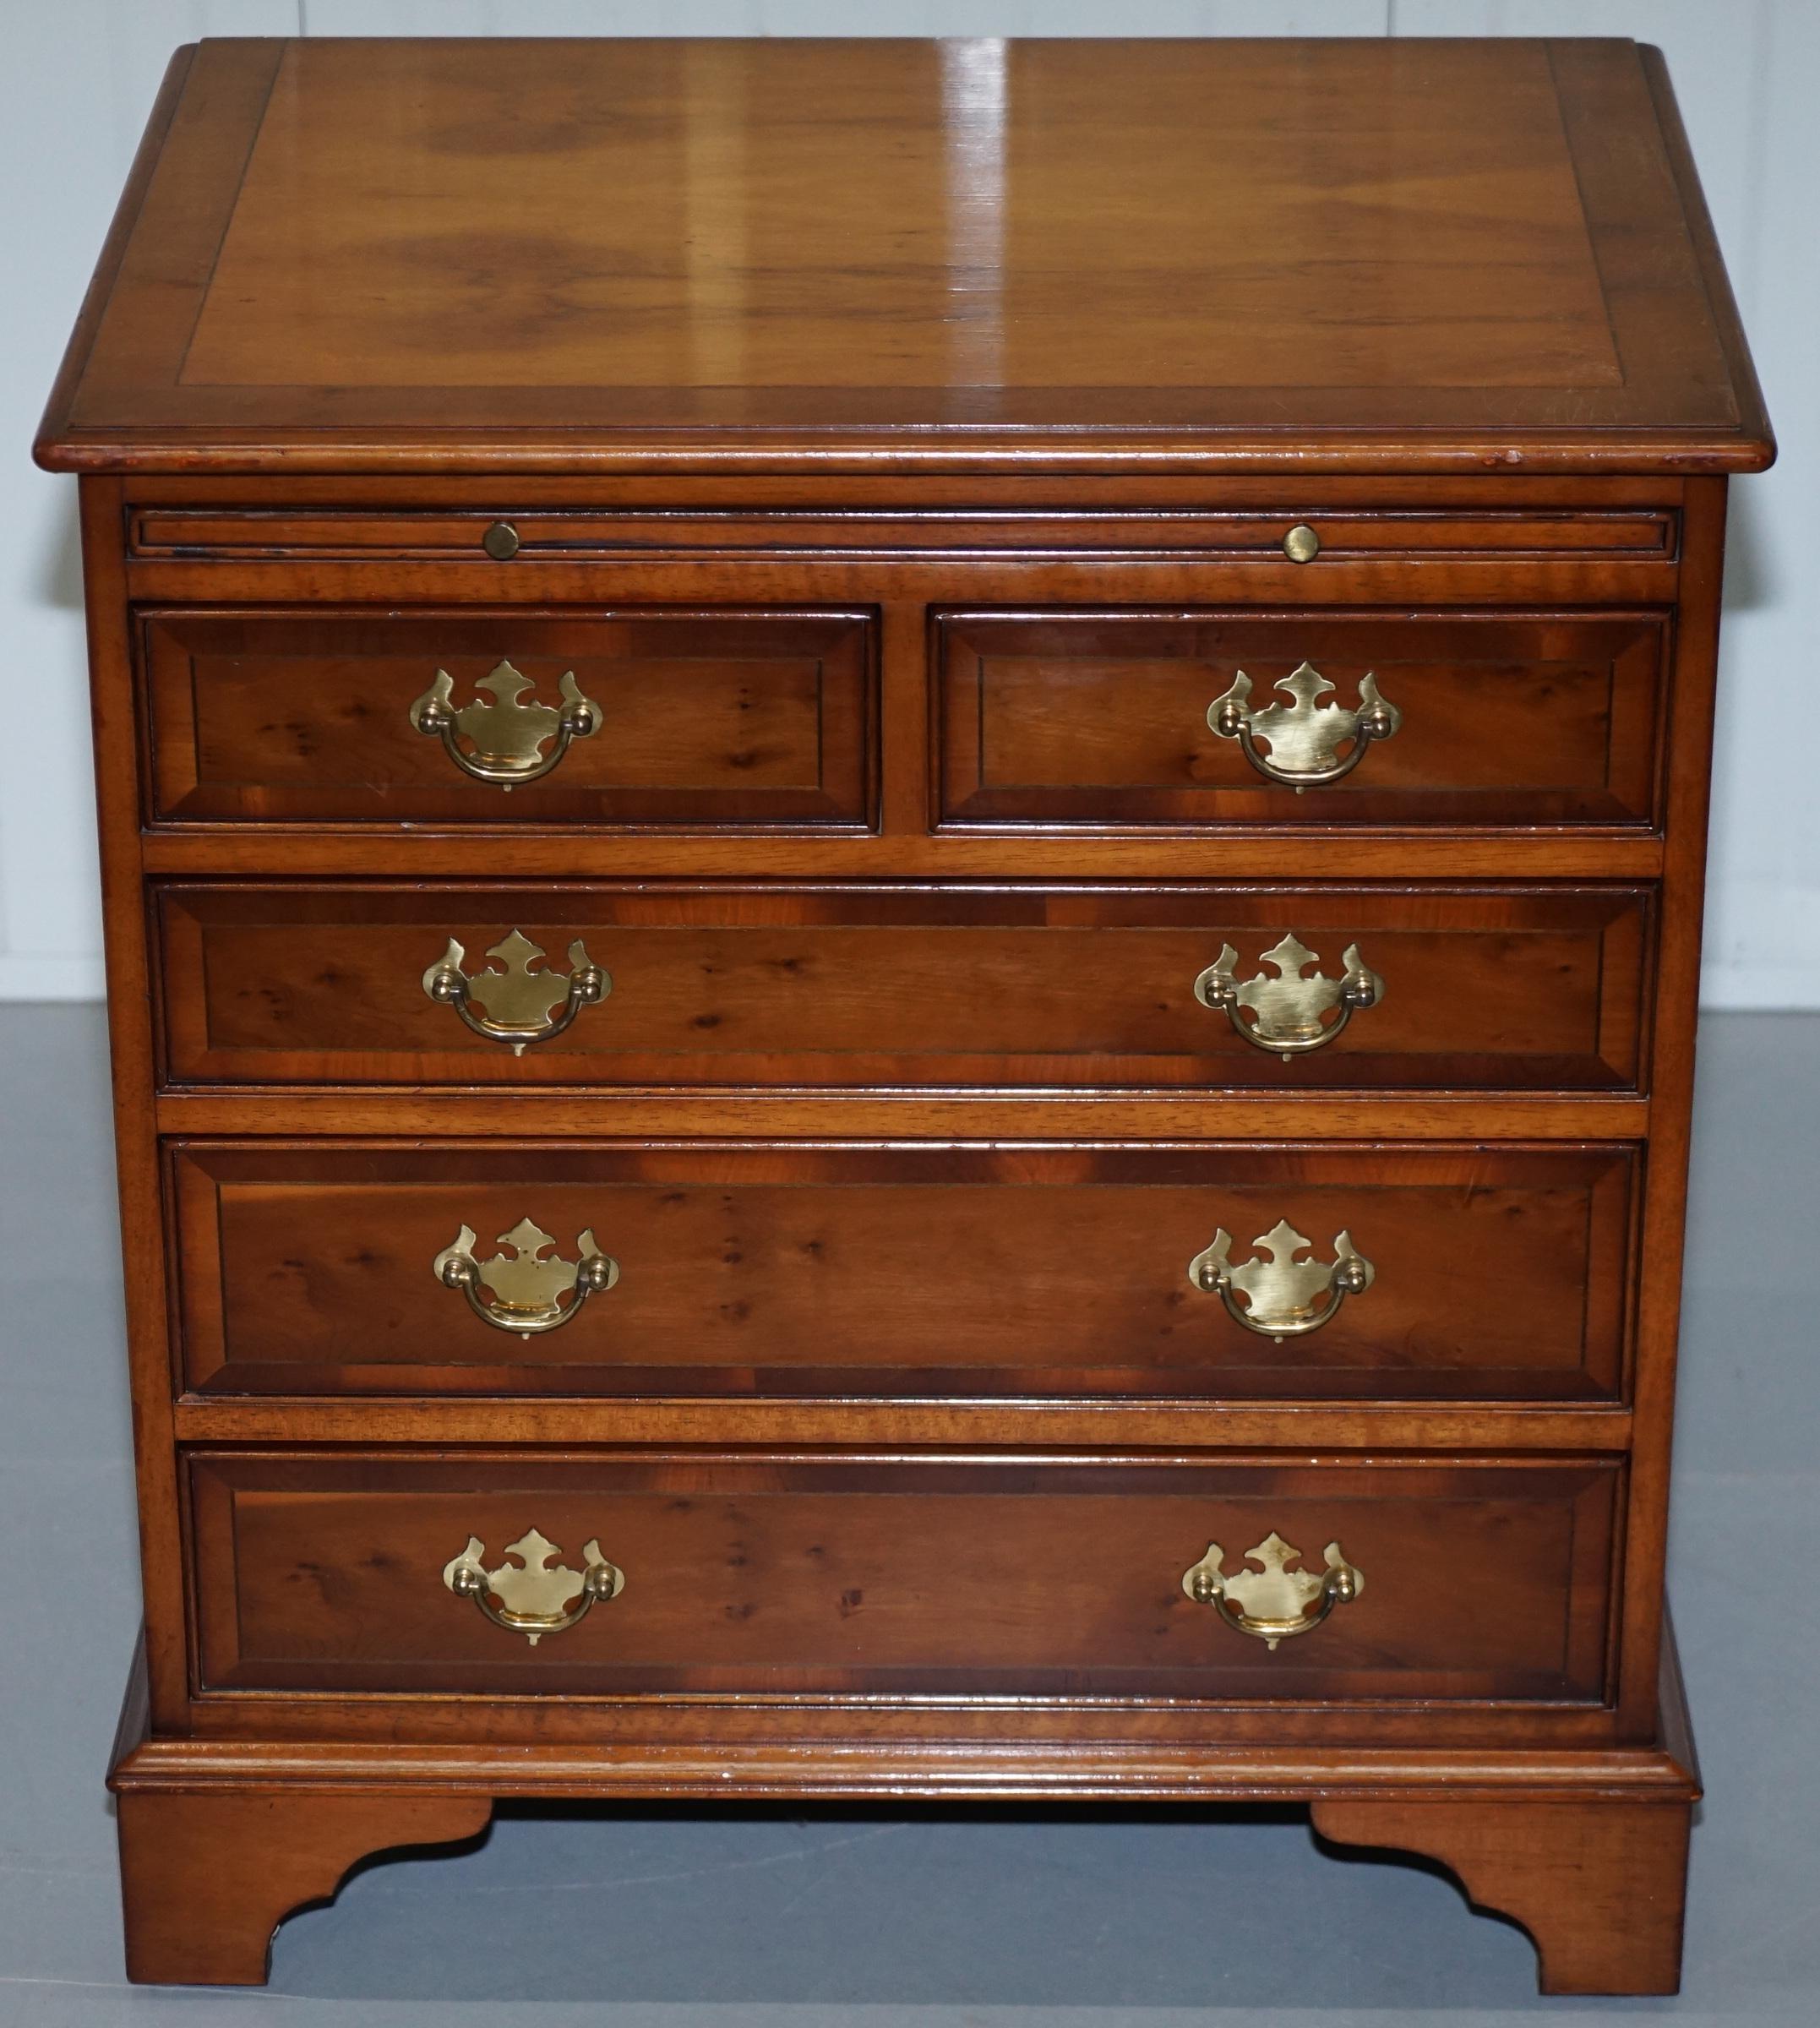 We are delighted to offer for sale this lovely Vintage handmade in England Burr Yew wood chest of drawers in the Georgian manor with luxury green leather butlers serving tray

A very good looking and well-made piece, sized as to be a side or